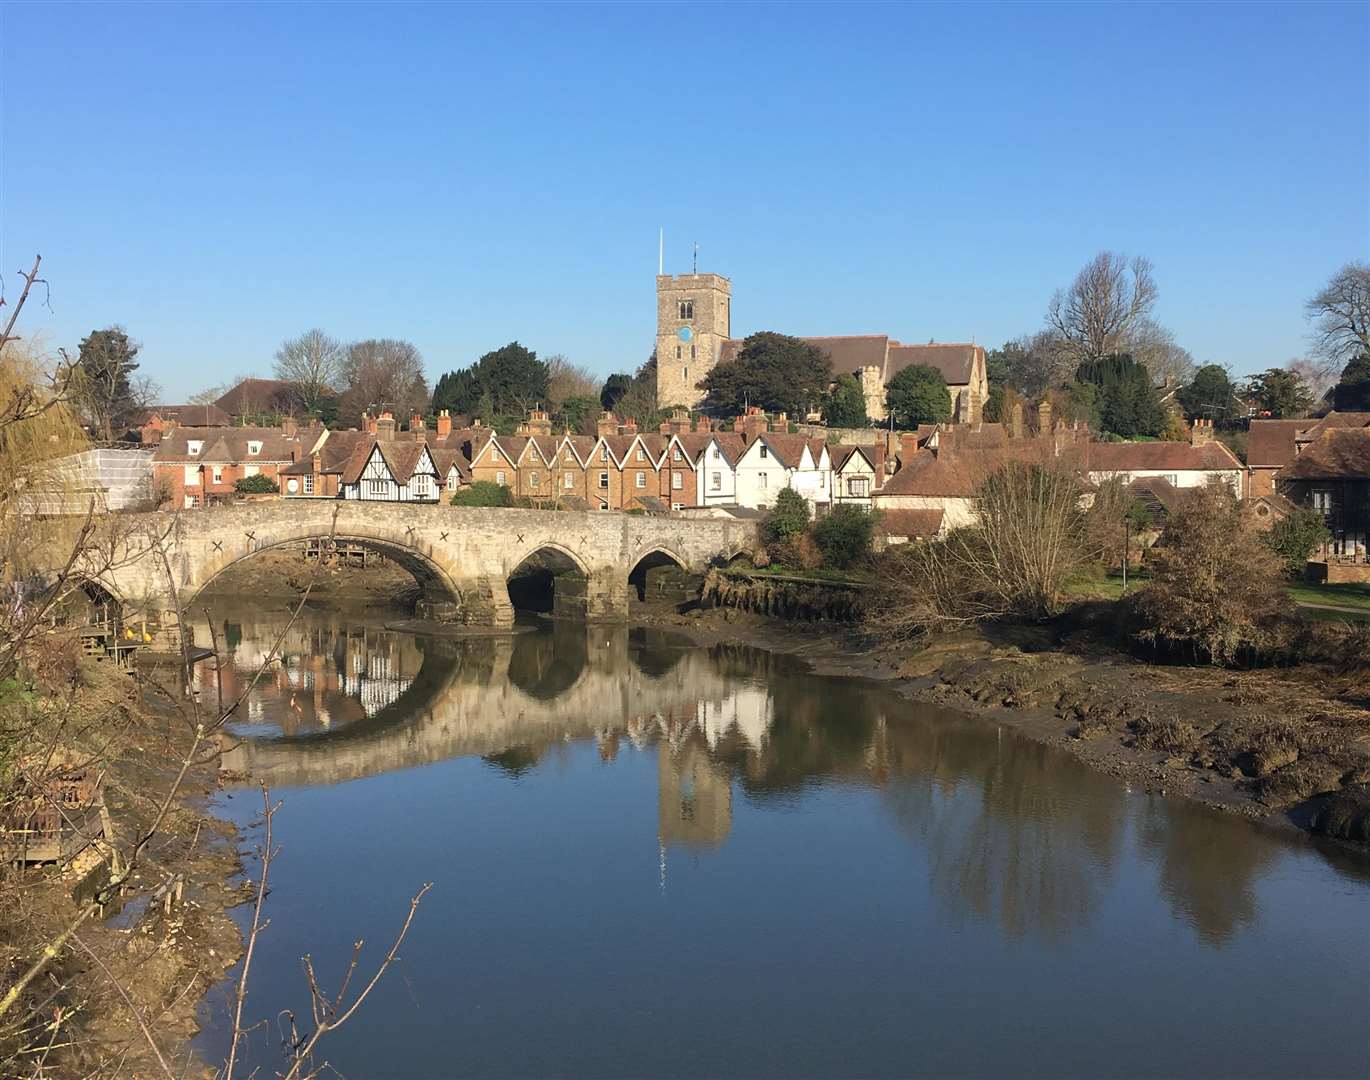 Sunny weather in Aylesford. Picture: Luke May